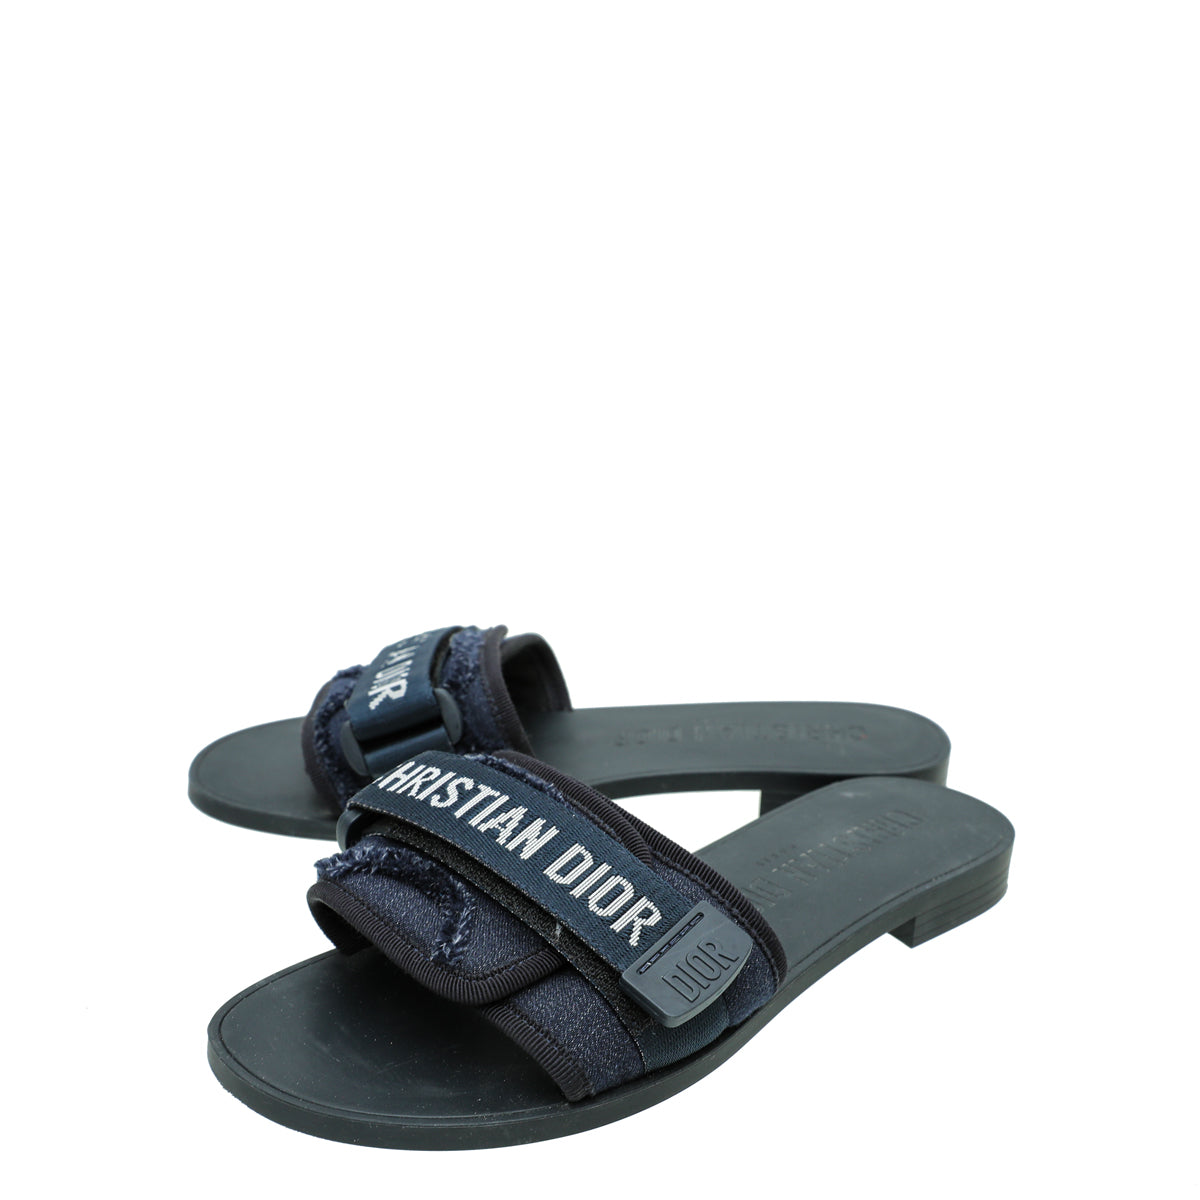 Christian Dior Navy Blue Camouflage Dio(r)evolution Technical Fabric Slide Sandals 37